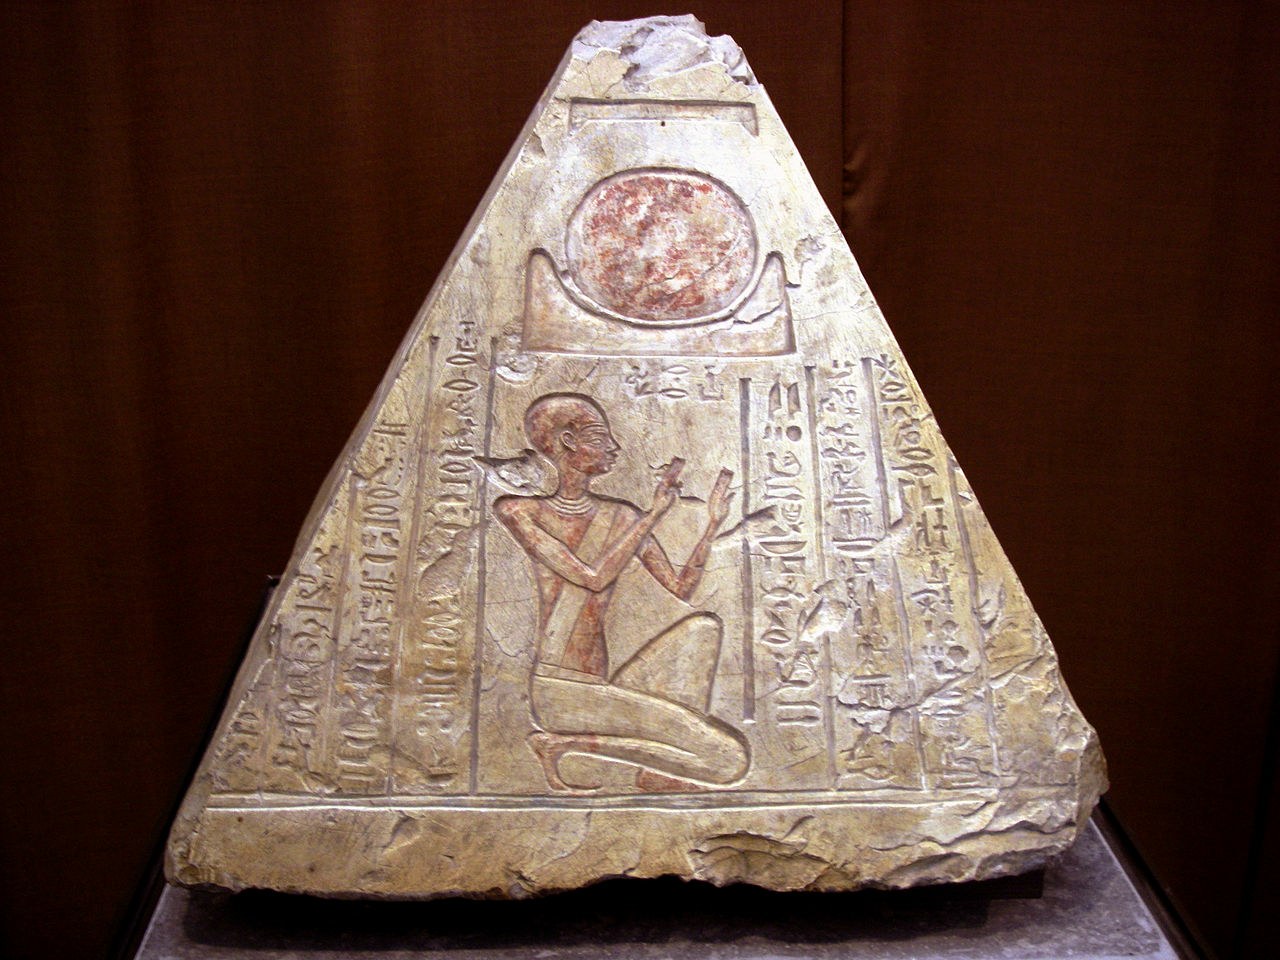 Ancient telegraph: Light signals used for communication in ancient Egypt? 4